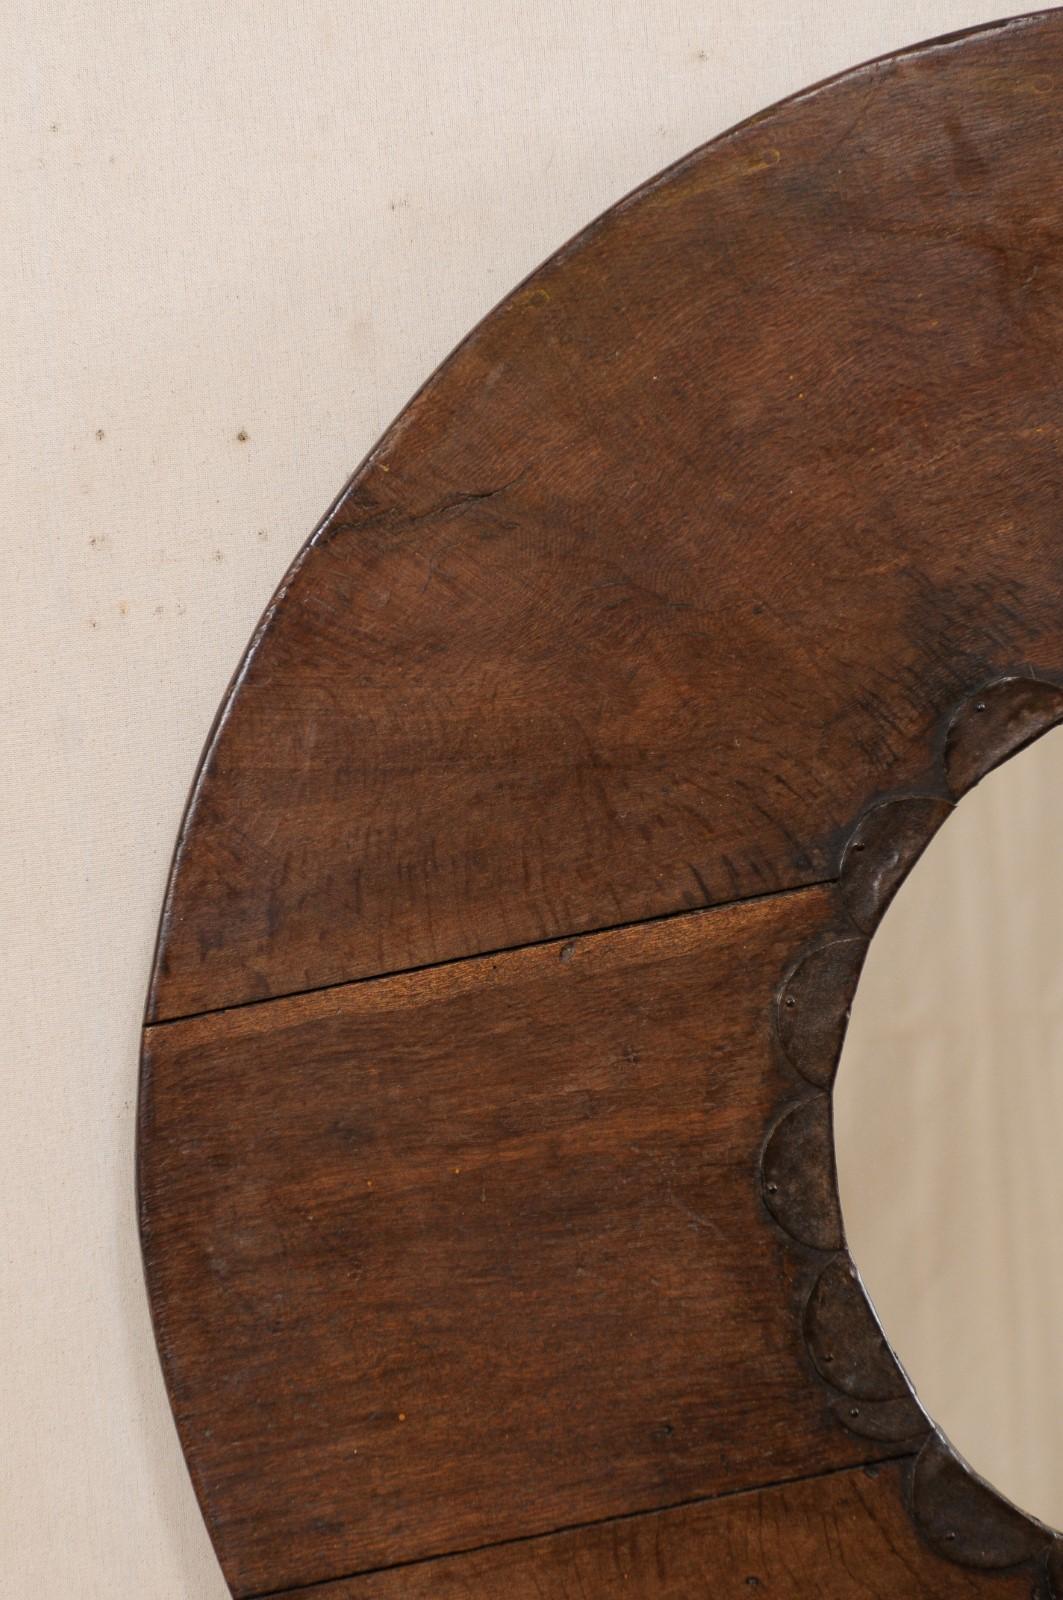 Unique Circular-Shaped Mirror from an Old Wooden N. African Cooking Utensil For Sale 1